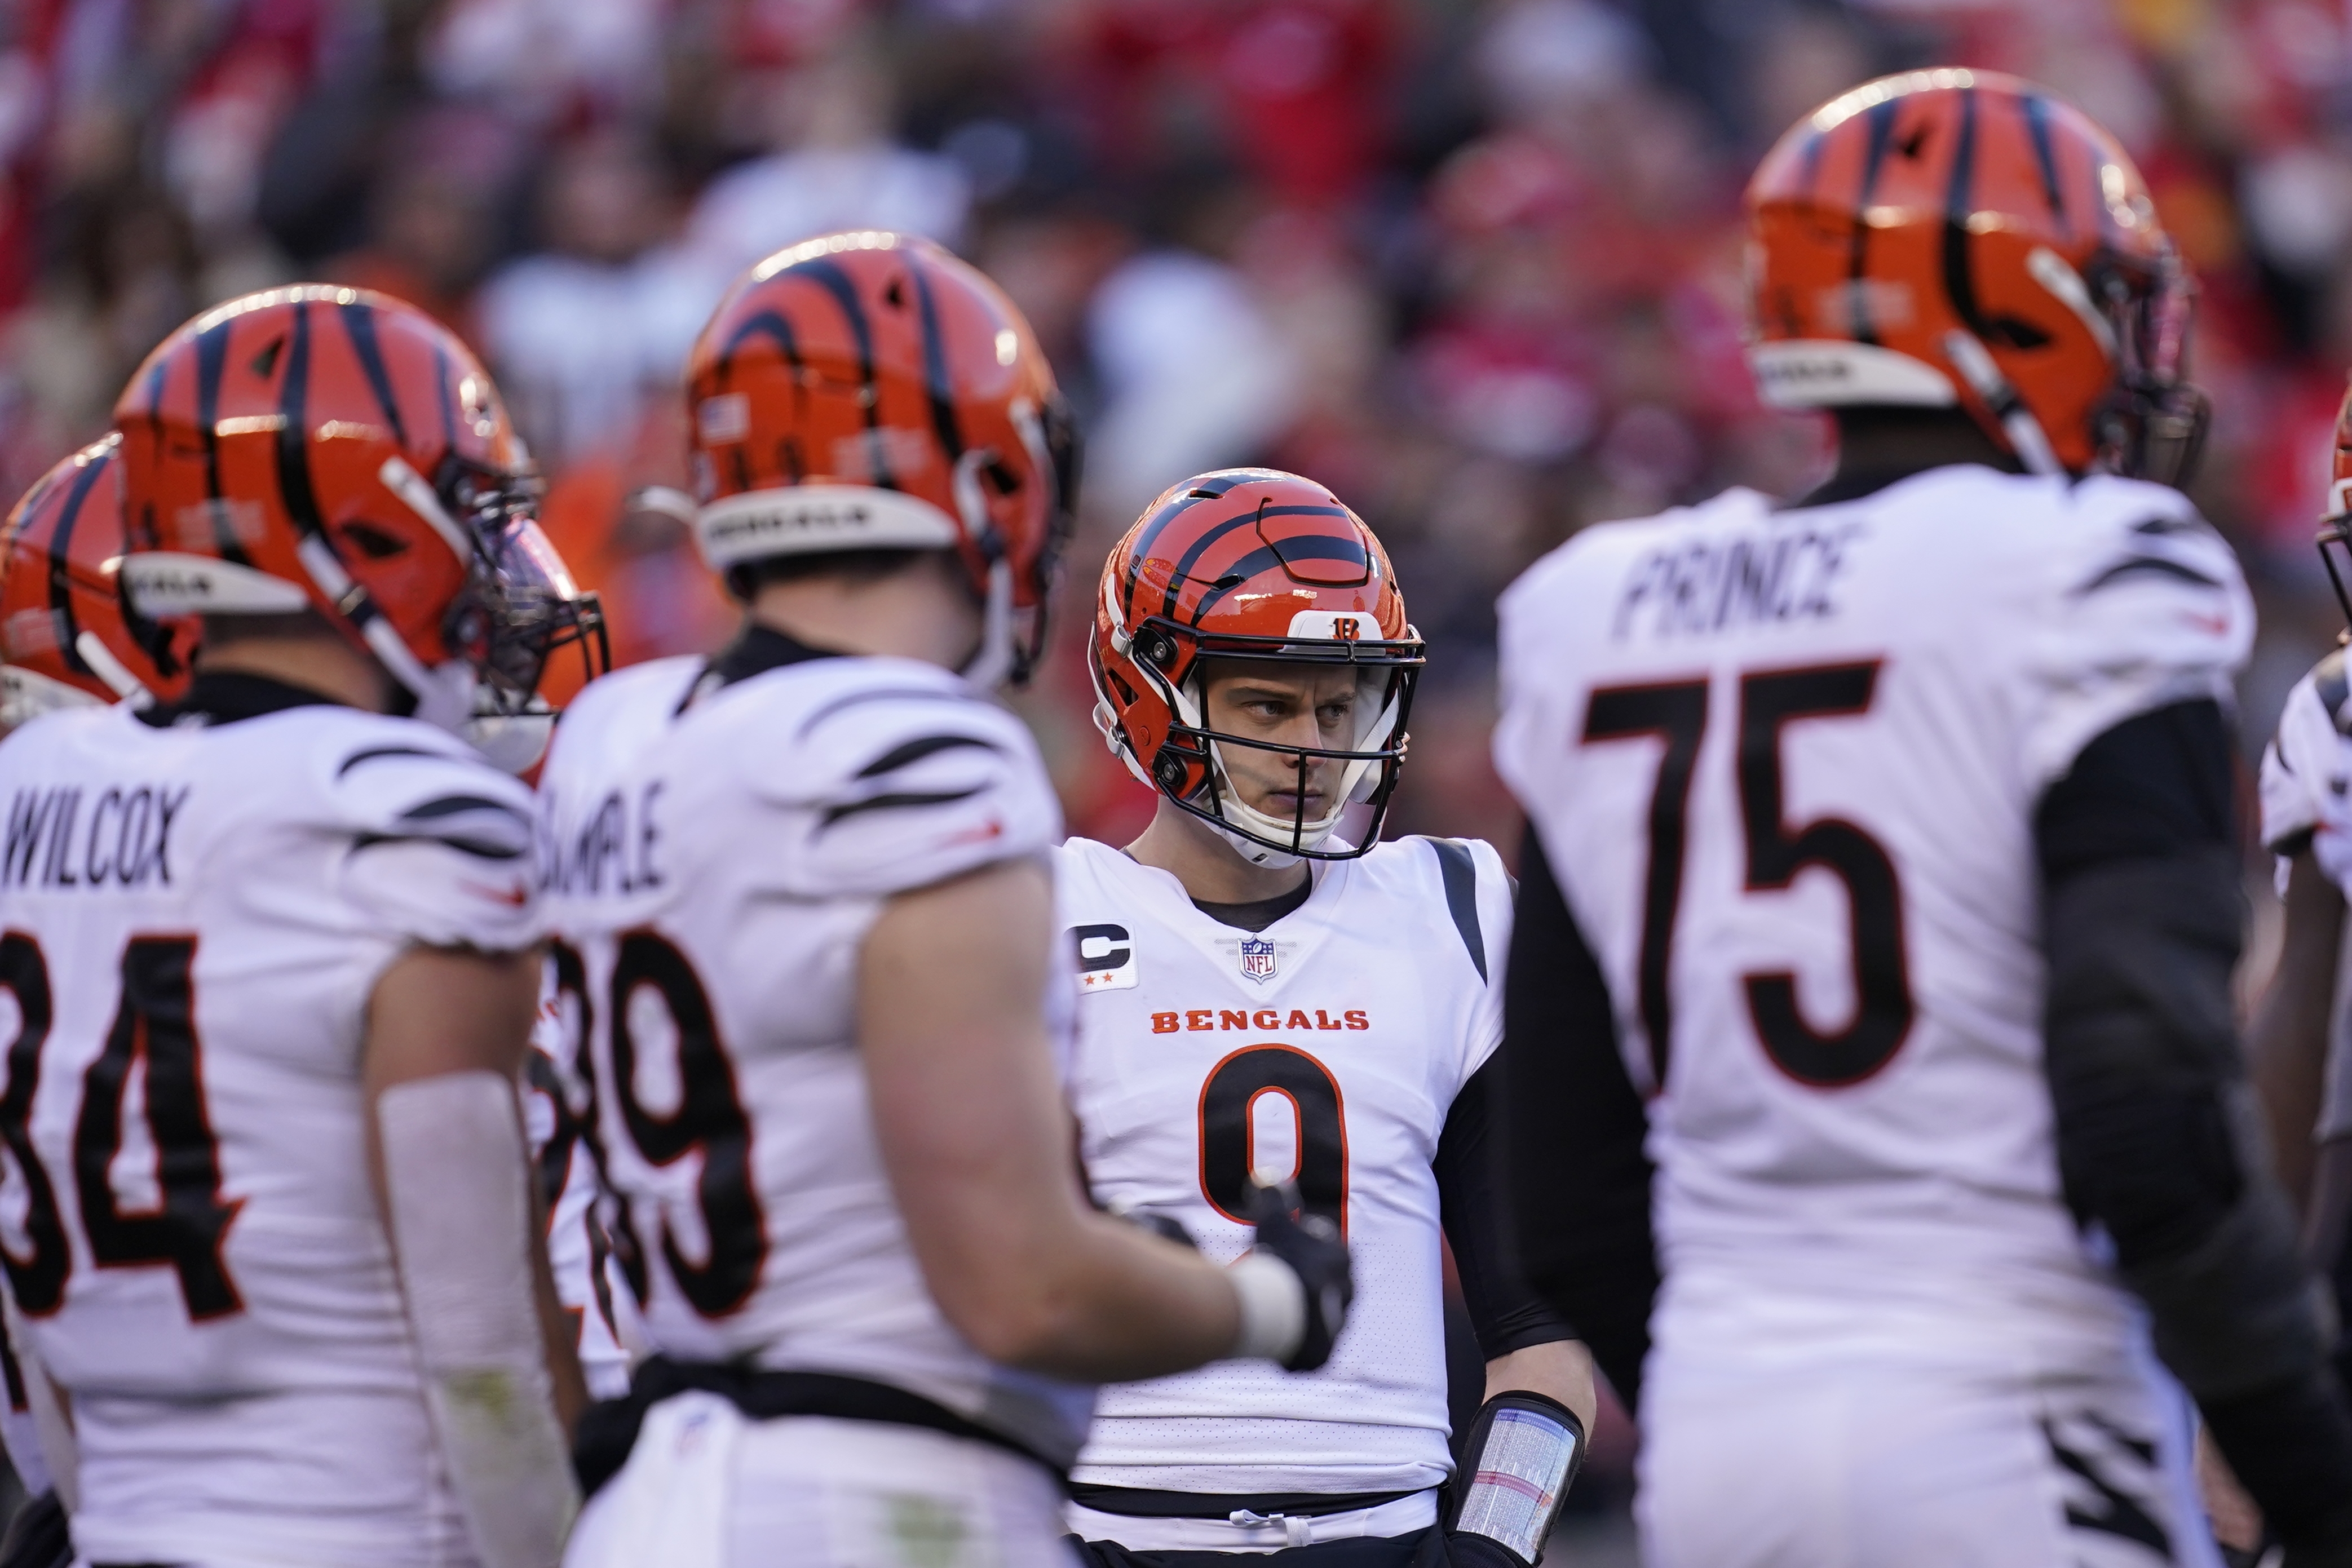 How to buy Bengals Super Bowl tickets: Date, time, location for